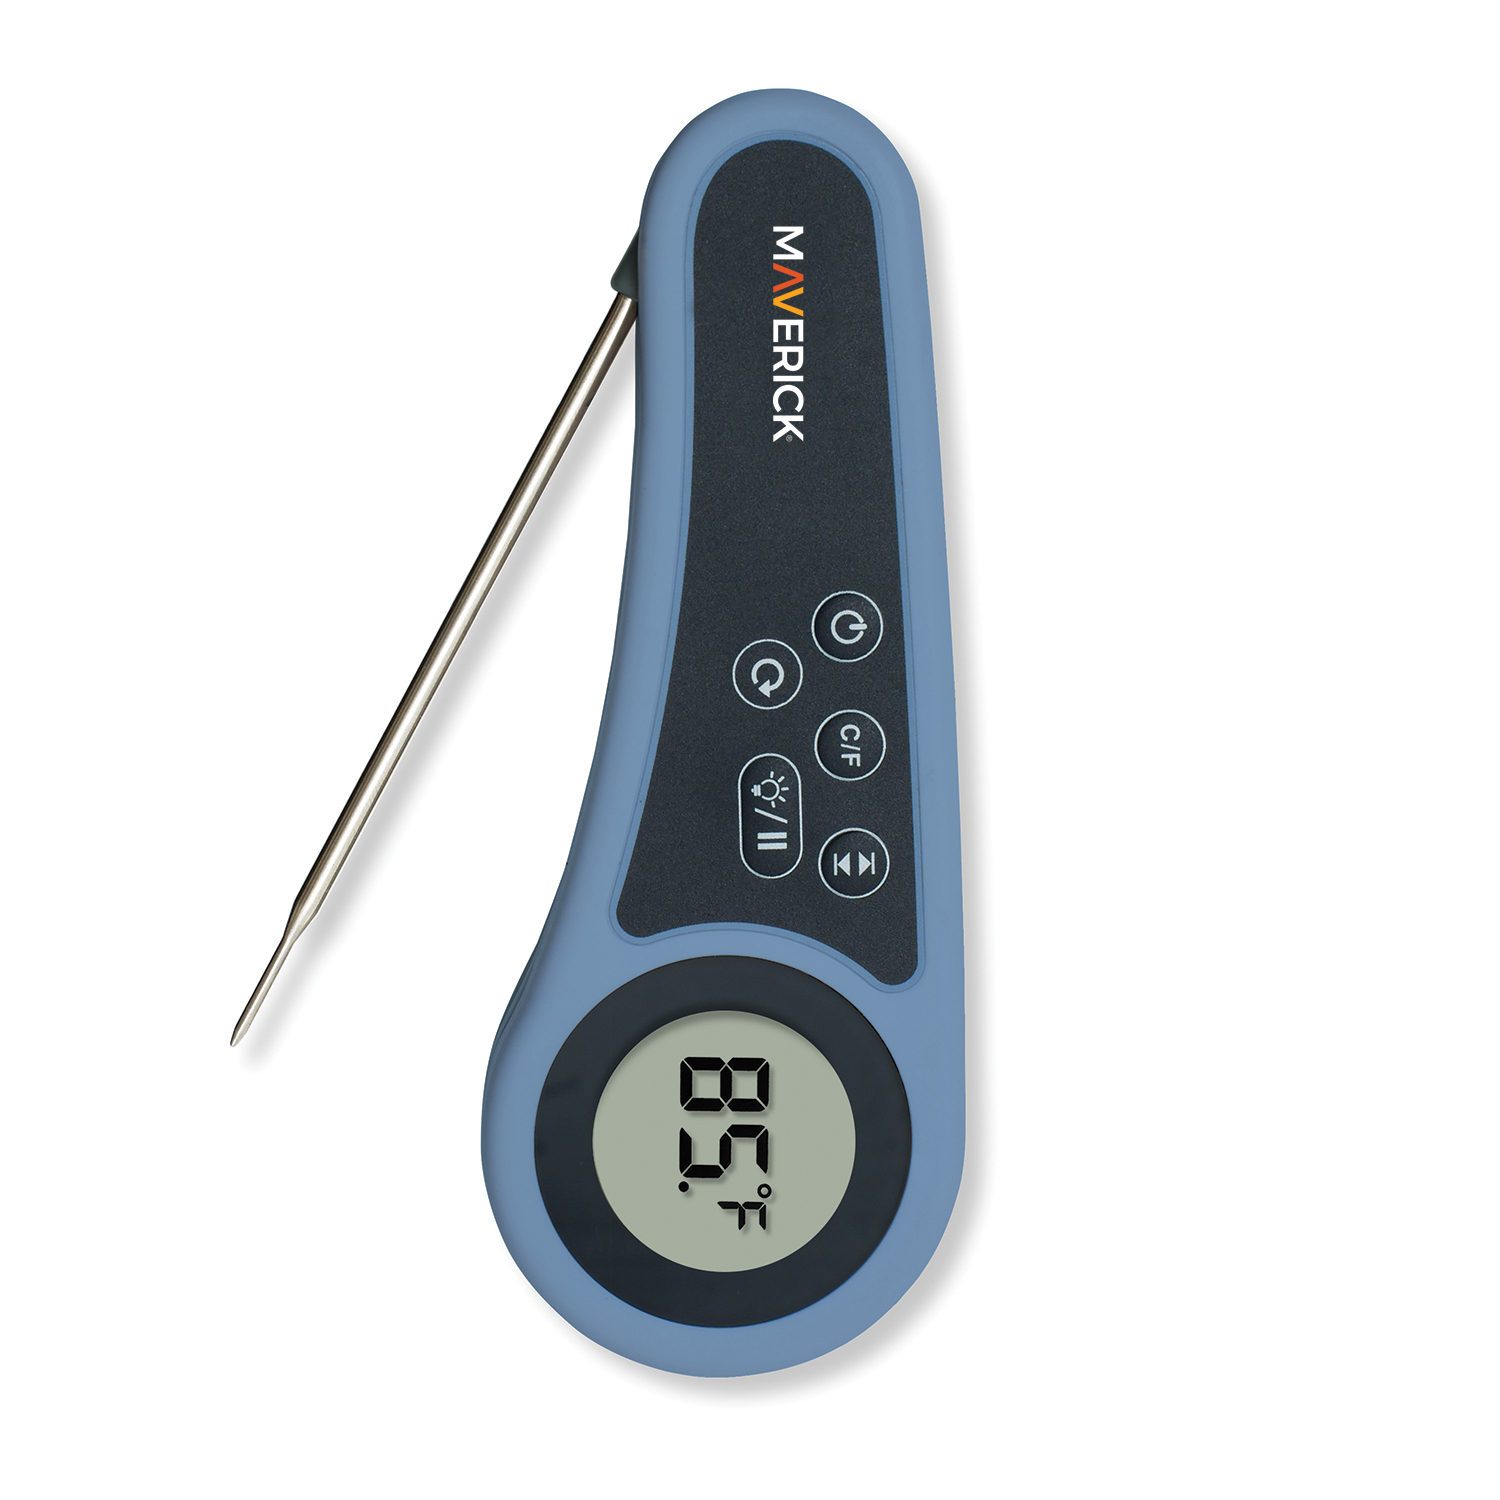 DT-15 Ultra-Thin Digital Probe Thermometer